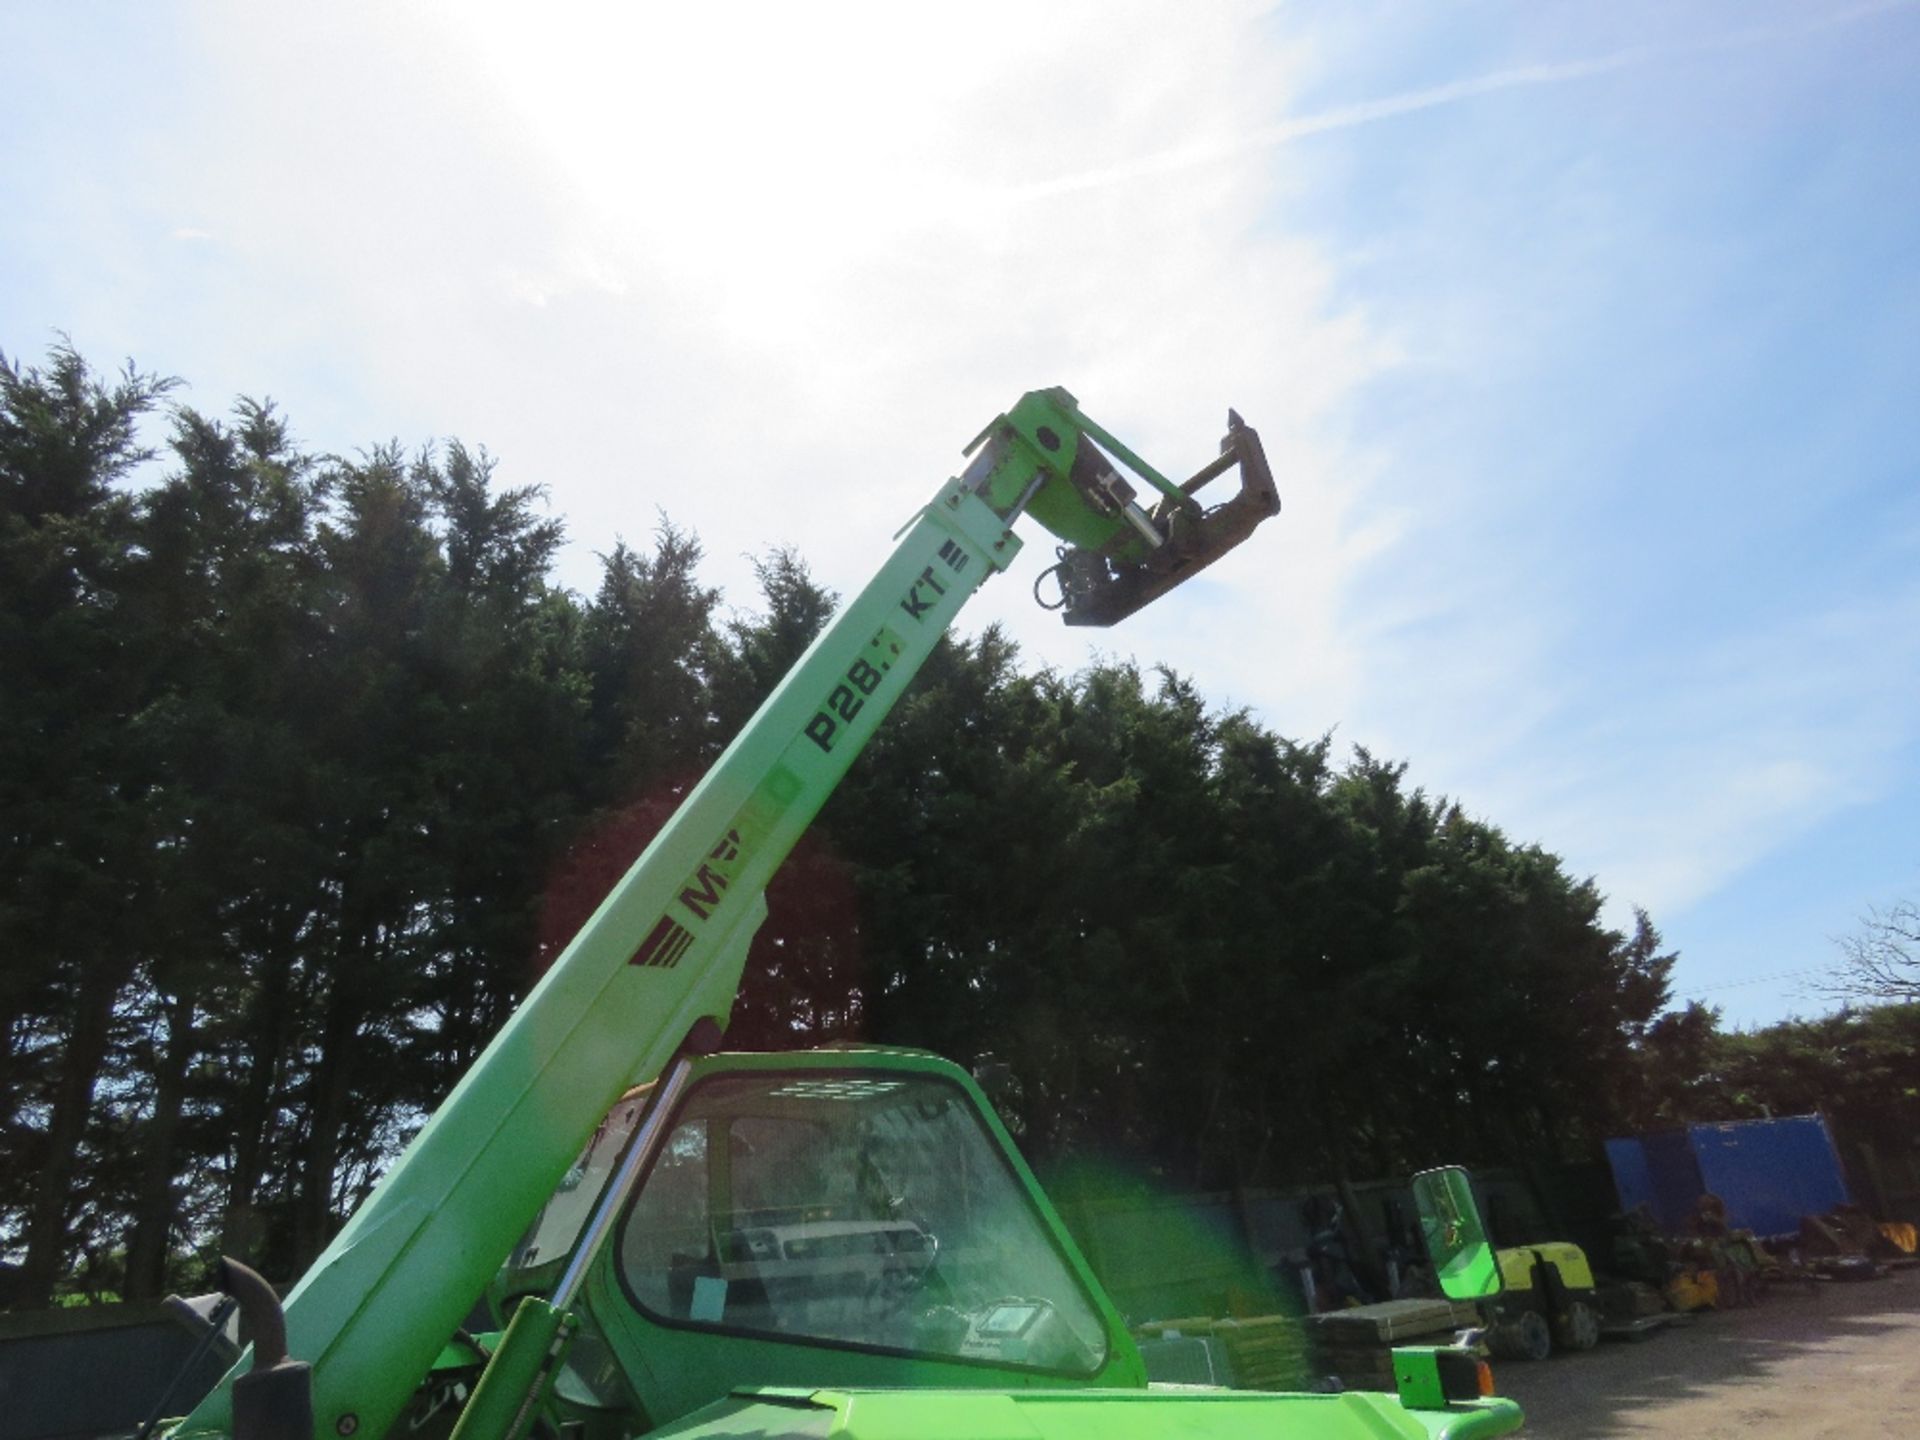 MERLO PANORAMIC P28.7 AGRI SPEC TELESCOPIC HANDLER, YEAR 2004 BUILD. 9764 REC HOURS. WHEN TESTED WAS - Image 6 of 13